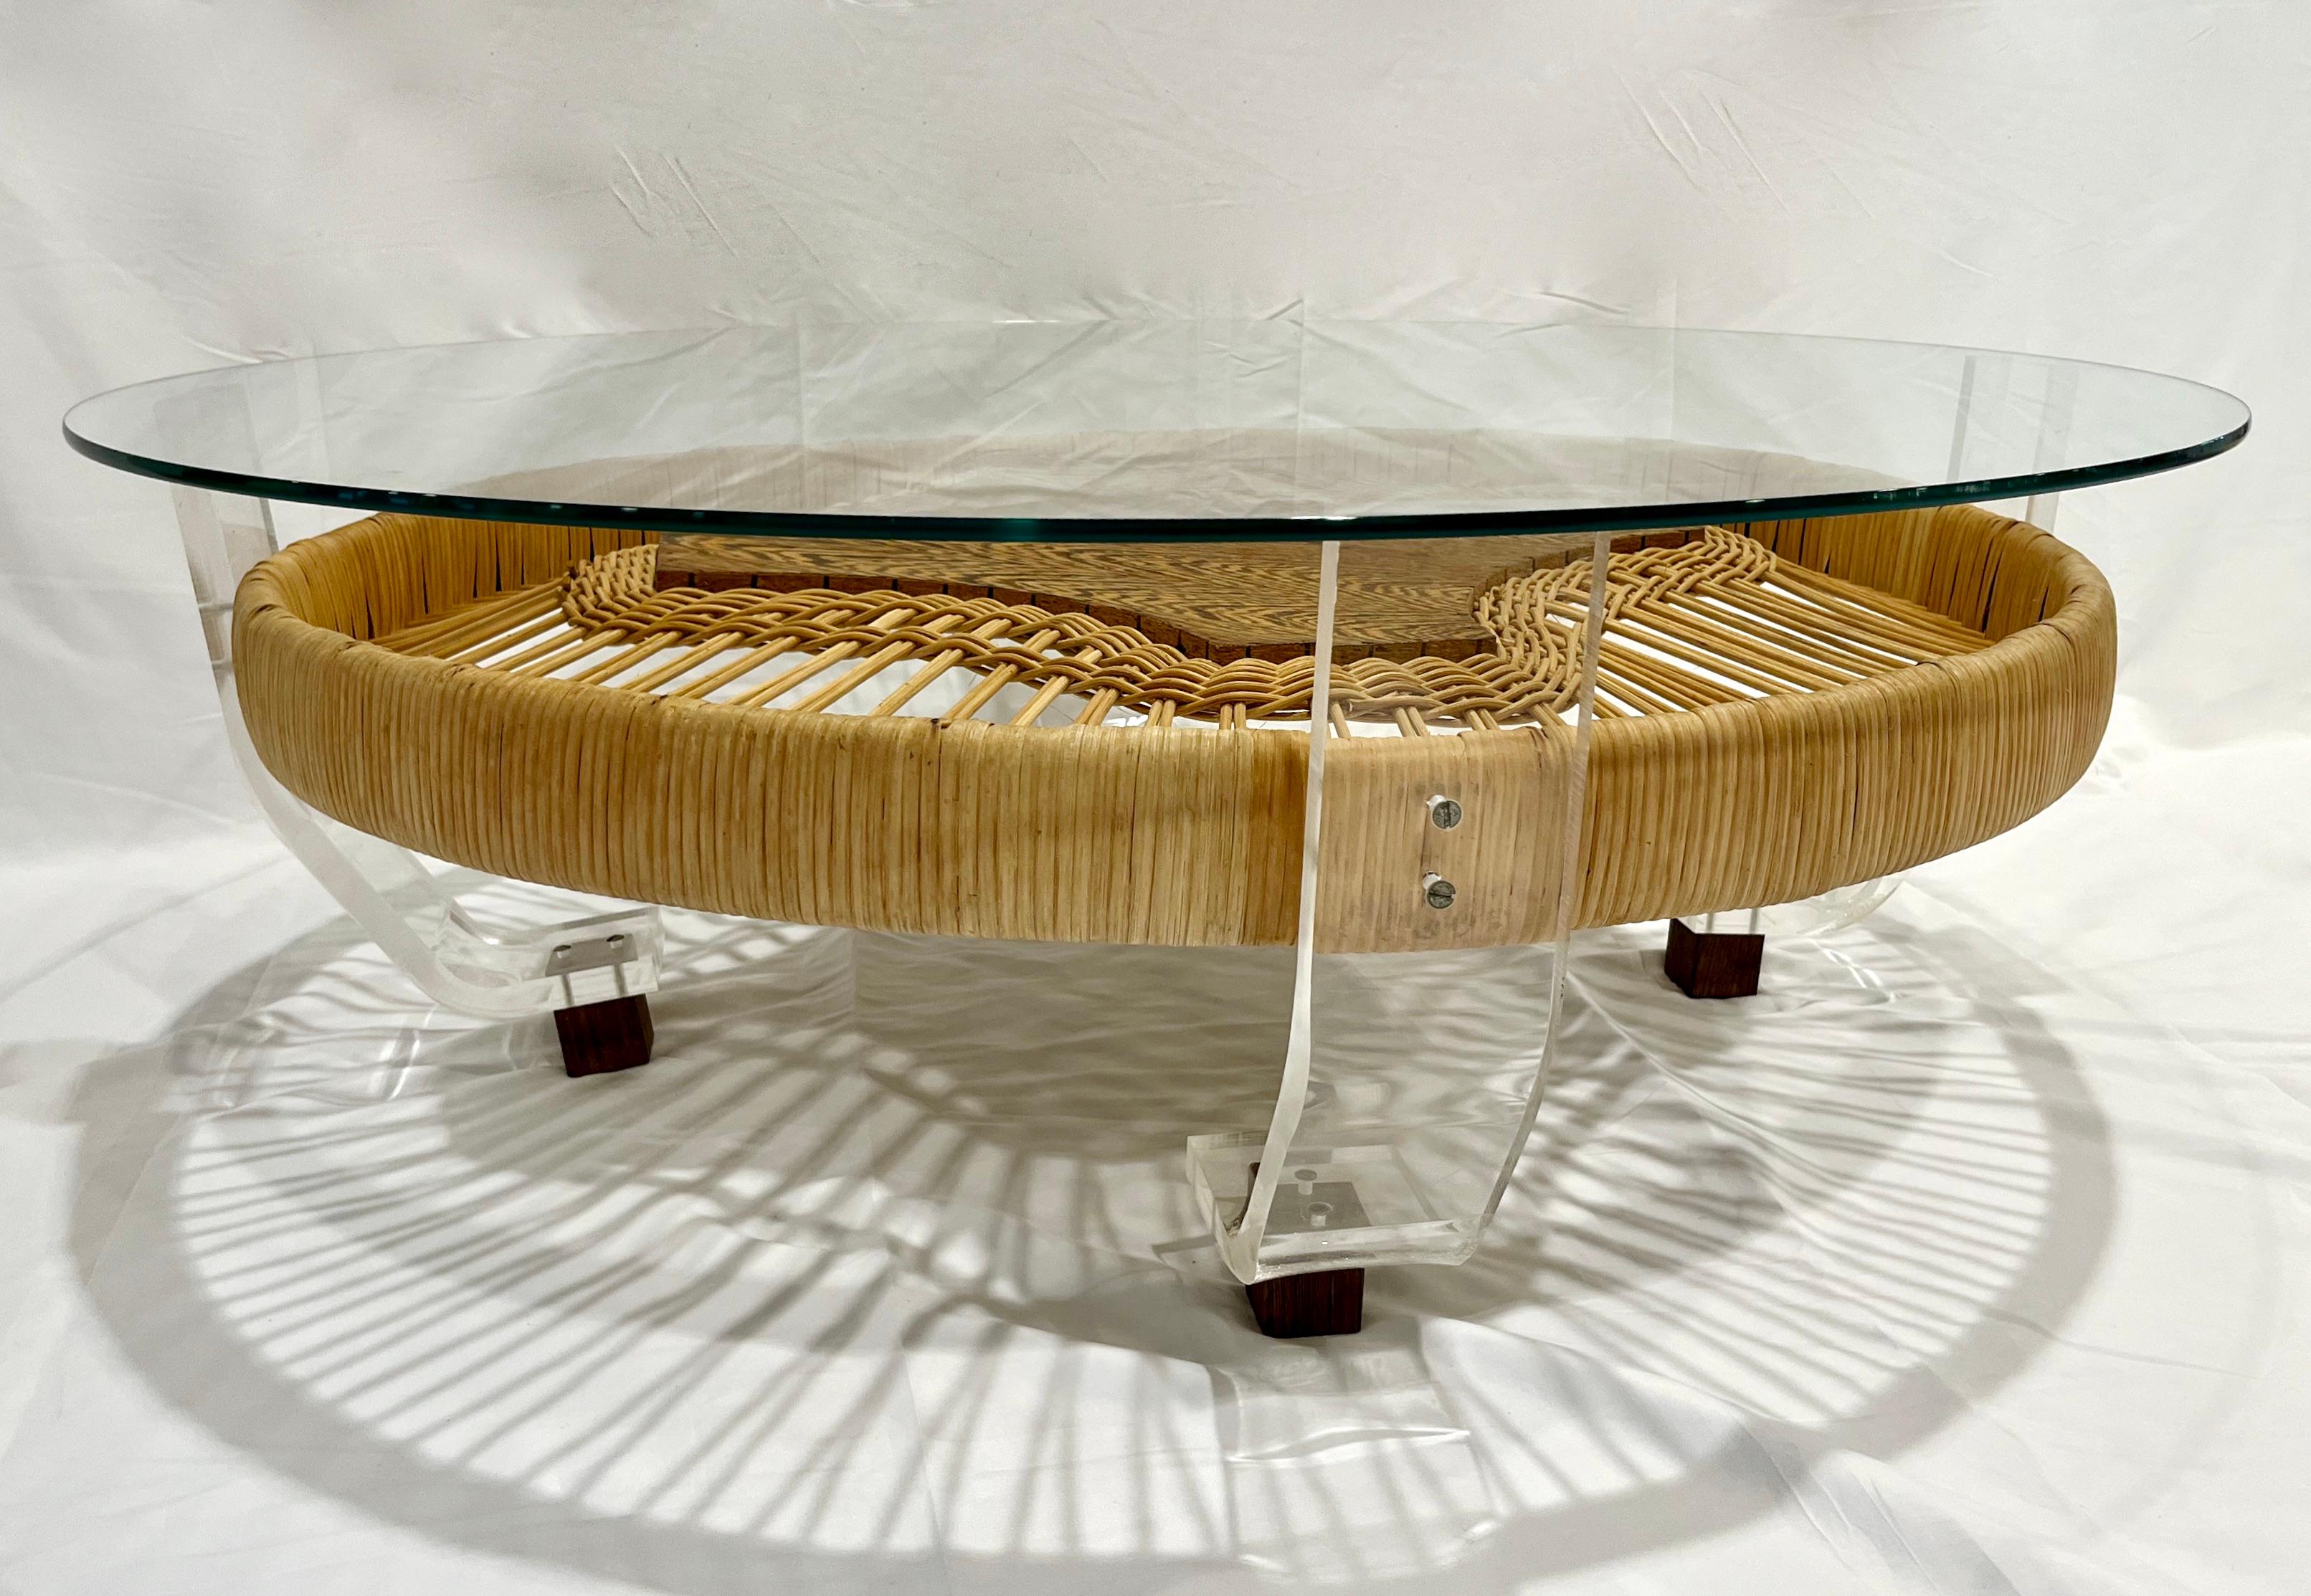 A unique french vintage work, a round sofa side coffee table entirely handcrafted in a very original way, using organic materials, the round bamboo shape consisting of a weaved rattan structure around a geometric center in patterned Brazilian wood,